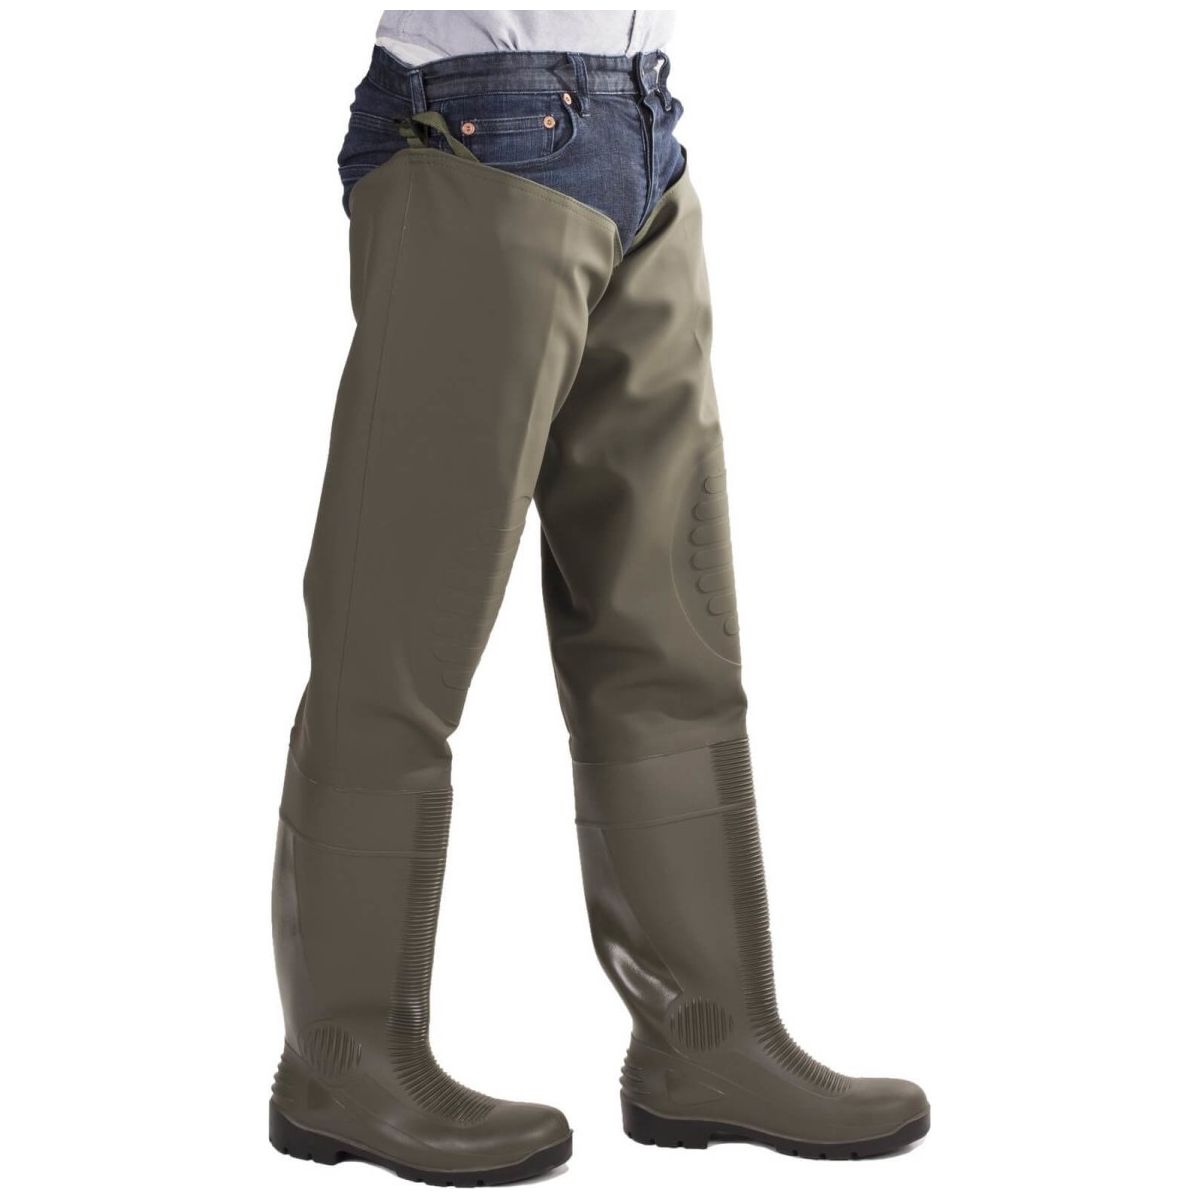 Amblers Forth Thigh Safety Waders Ladies –